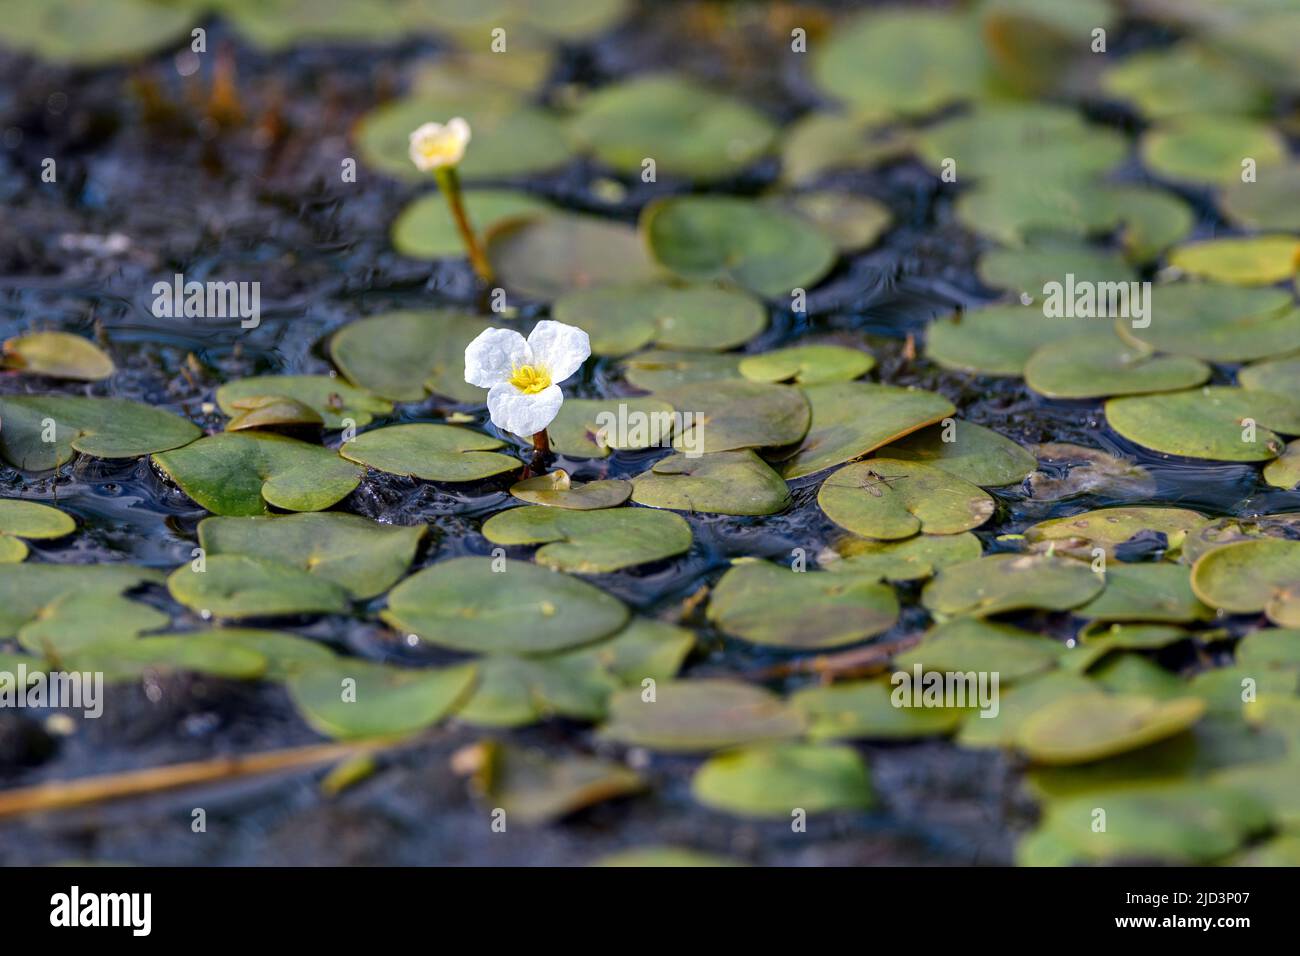 Common frogbit (Hydrocharis morsus-ranae) from Vejlerne, northern Denmark in August. Stock Photo